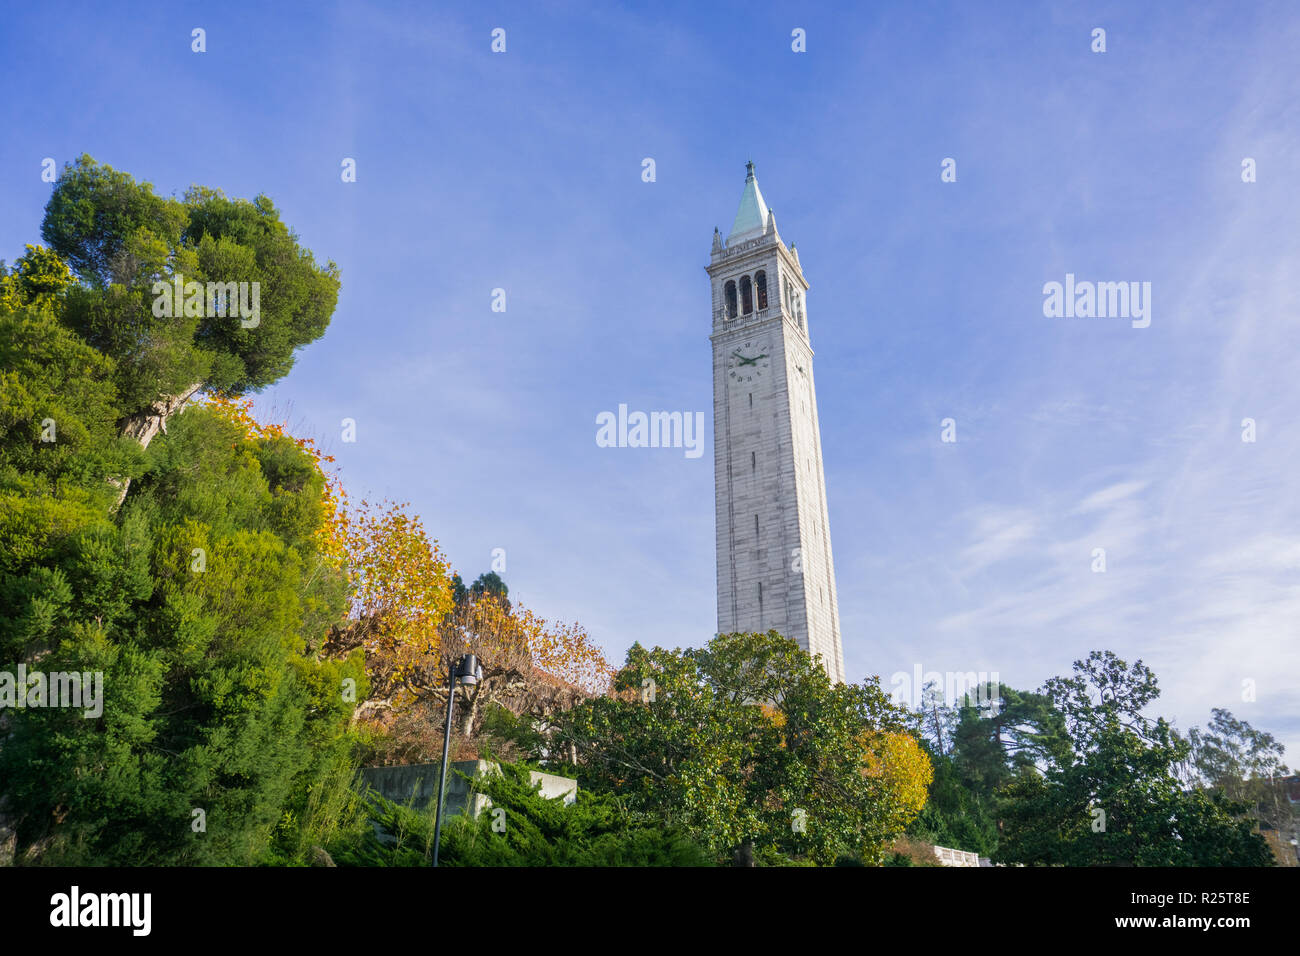 Sather tower (the Campanile) on a blue sky background, UC Berkeley, California, San Francisco bay Stock Photo